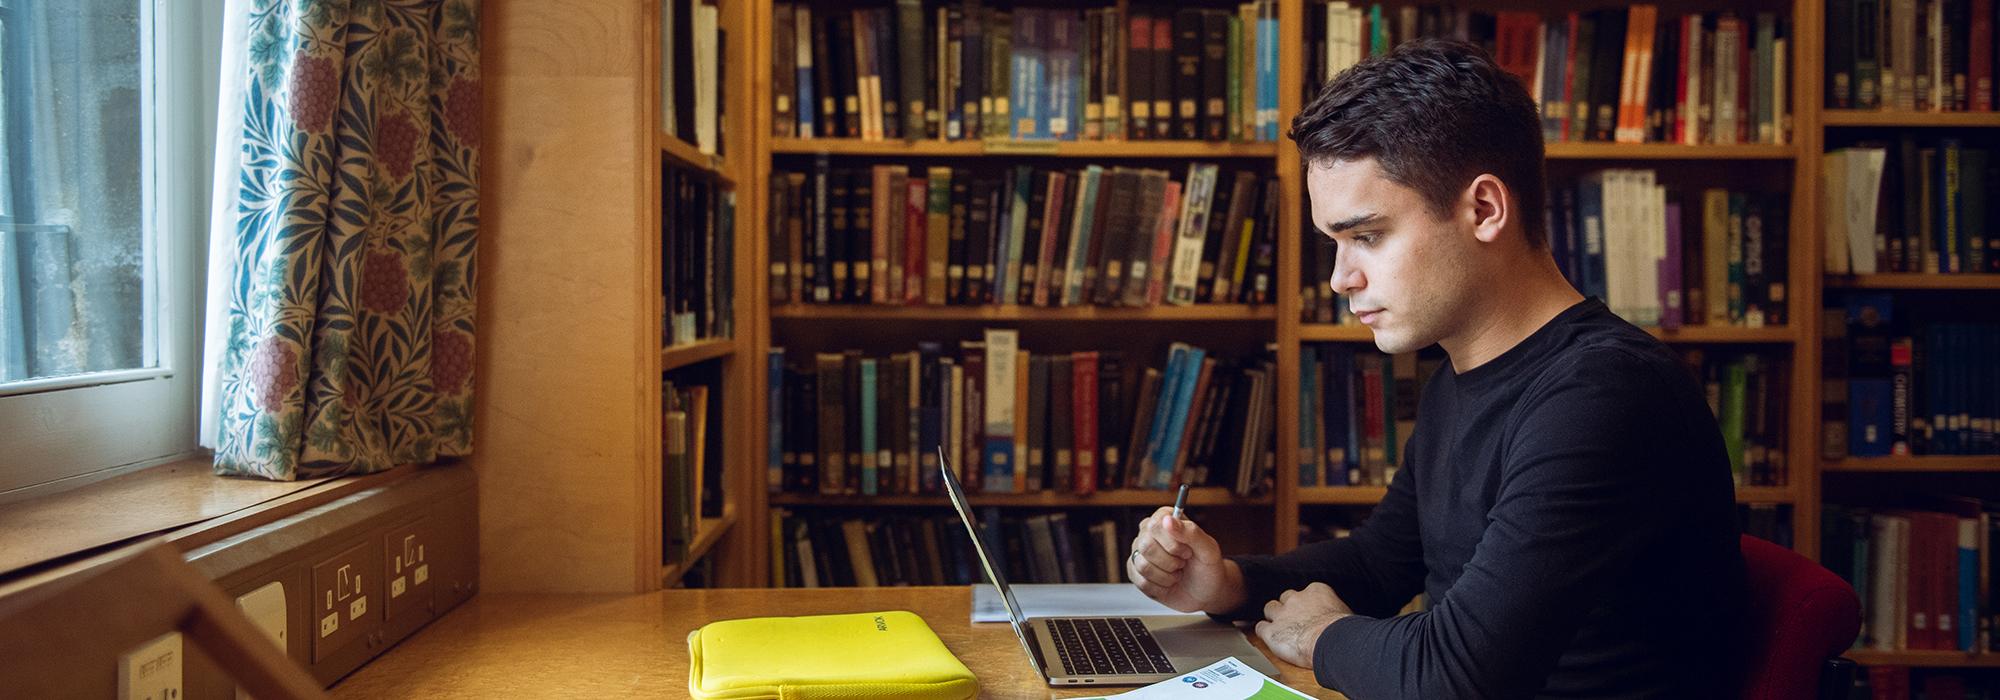 A student working in OWL library, 2019 - Photo: © John Cairns - www.johncairns.co.uk